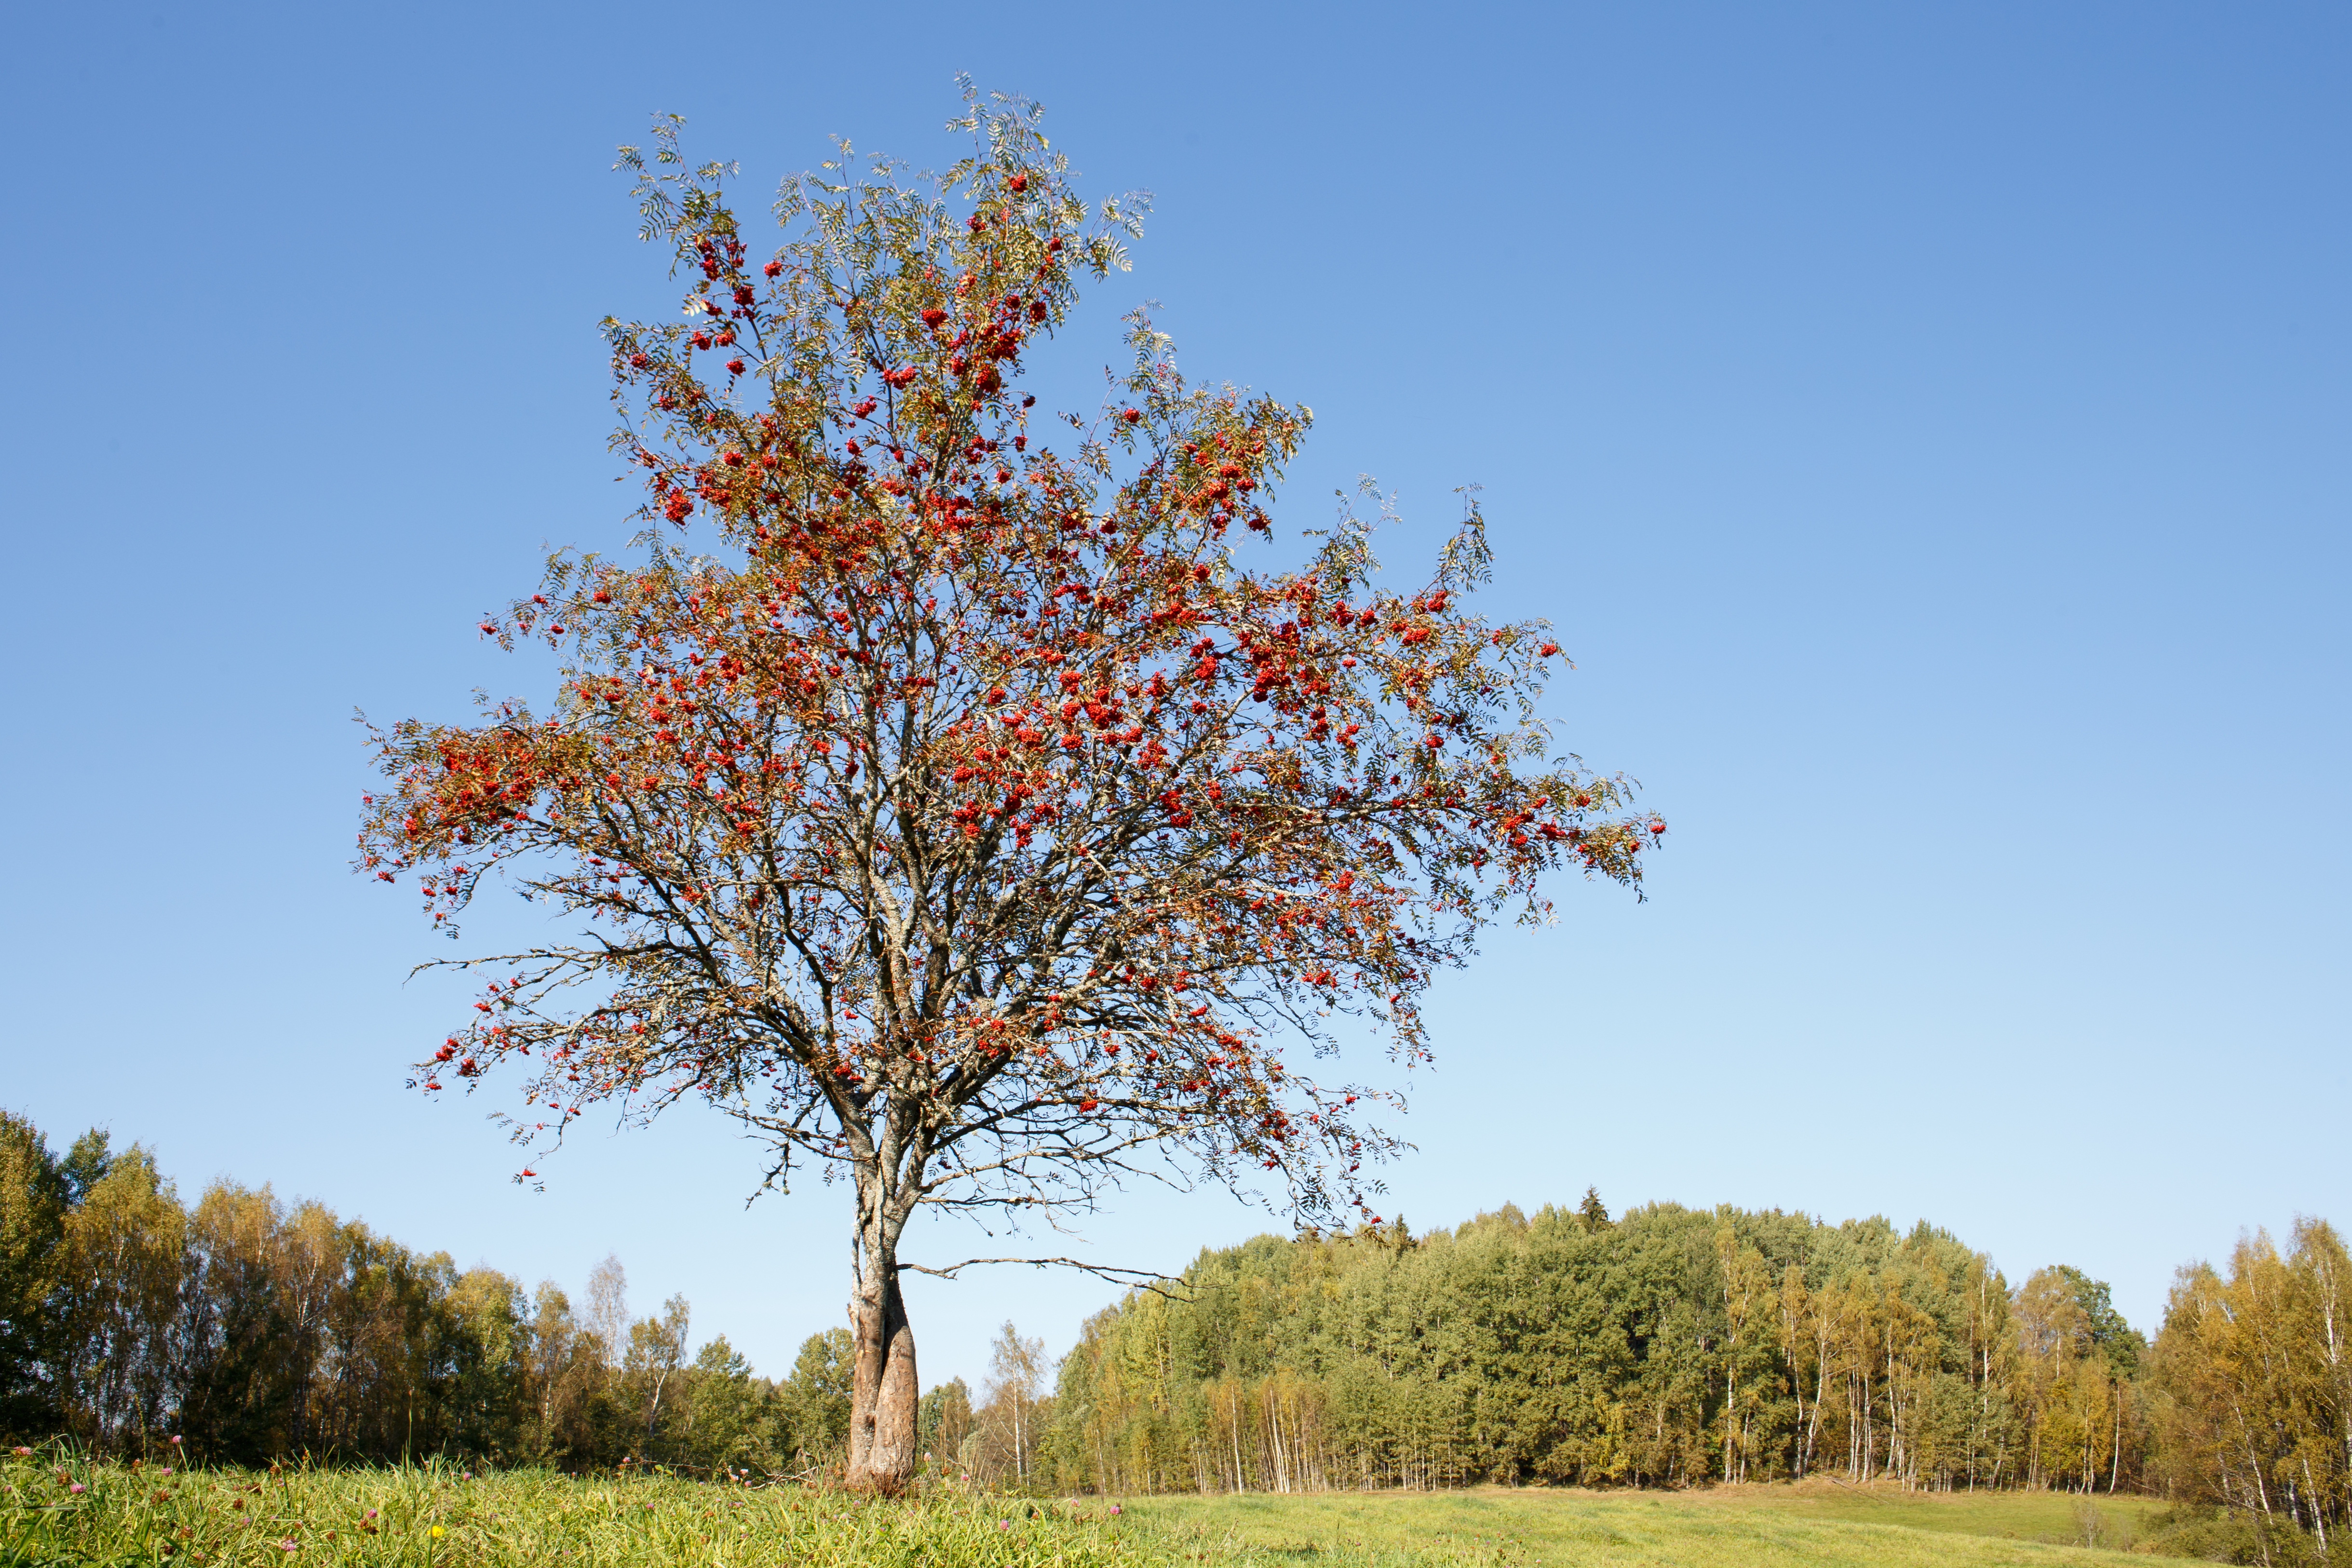 Mature rowan tree with red berries standing alone in a grassy field with mature trees in a line in the background.